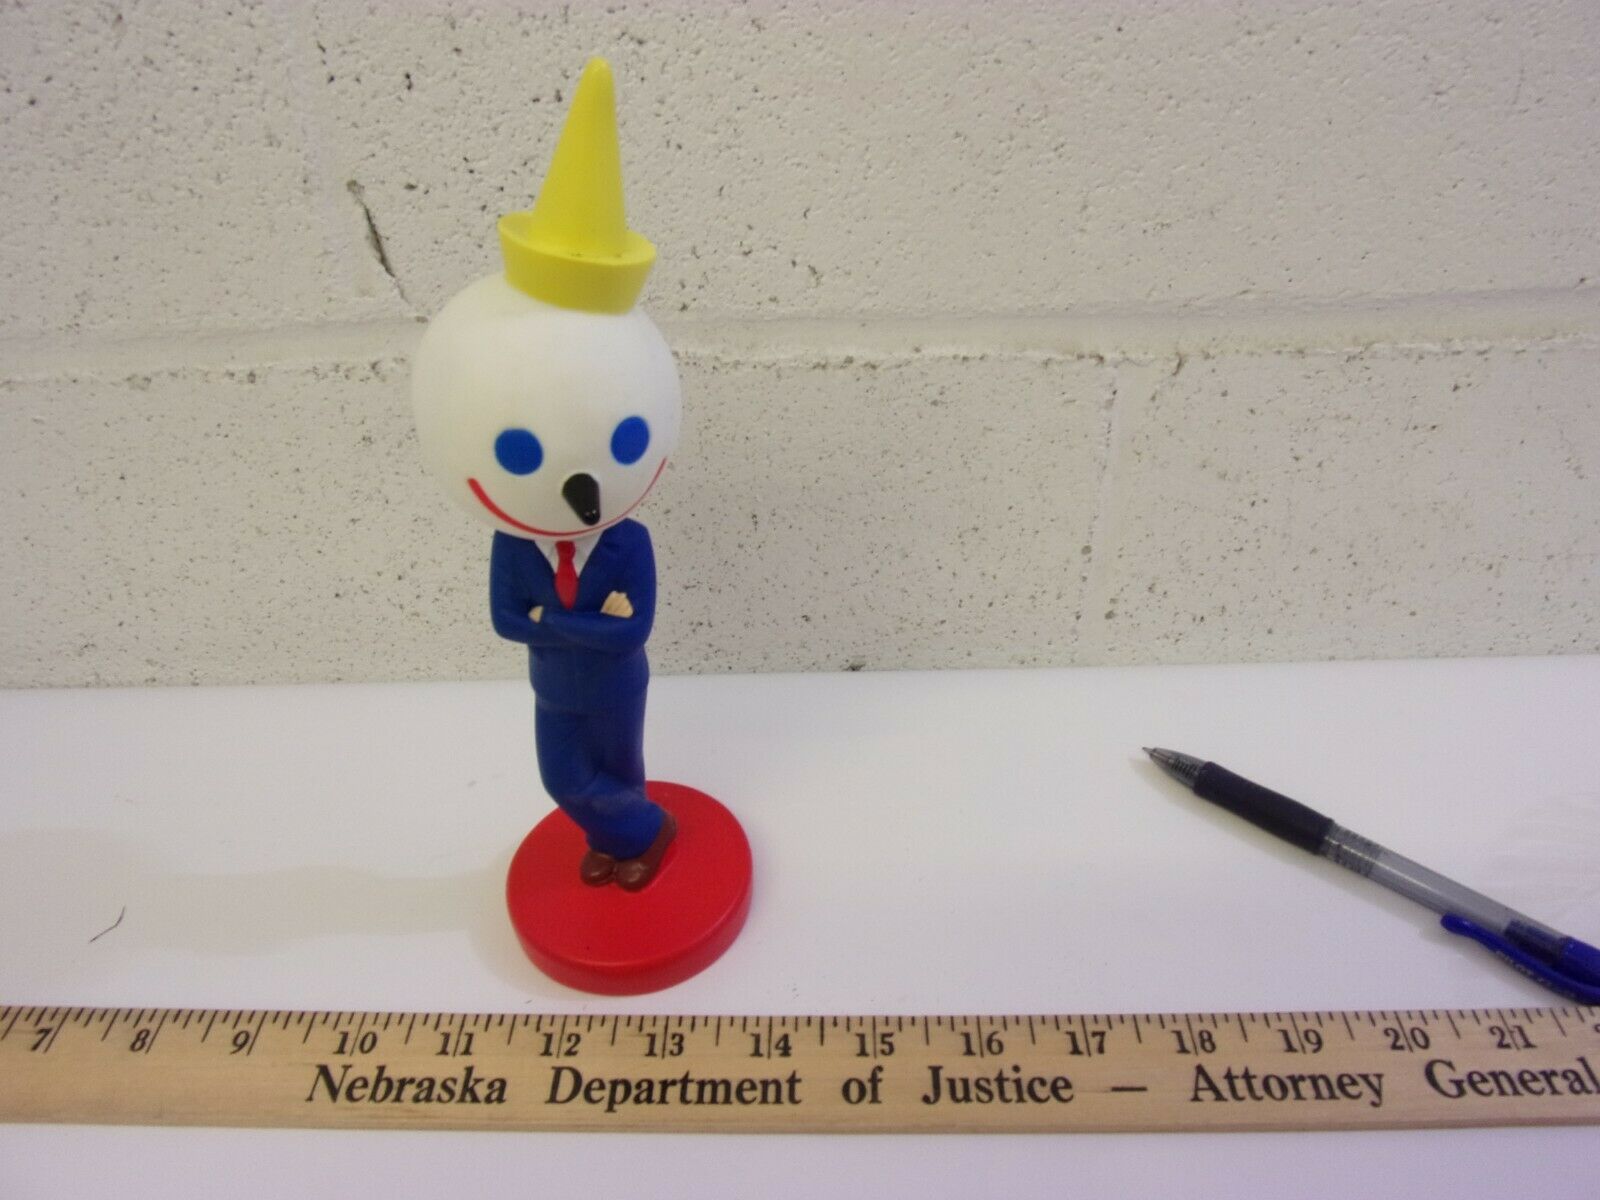 Ceo Jack-in-the-box Restaurant Bobble Head In Suit Office 8 1/4" Tall Figurine